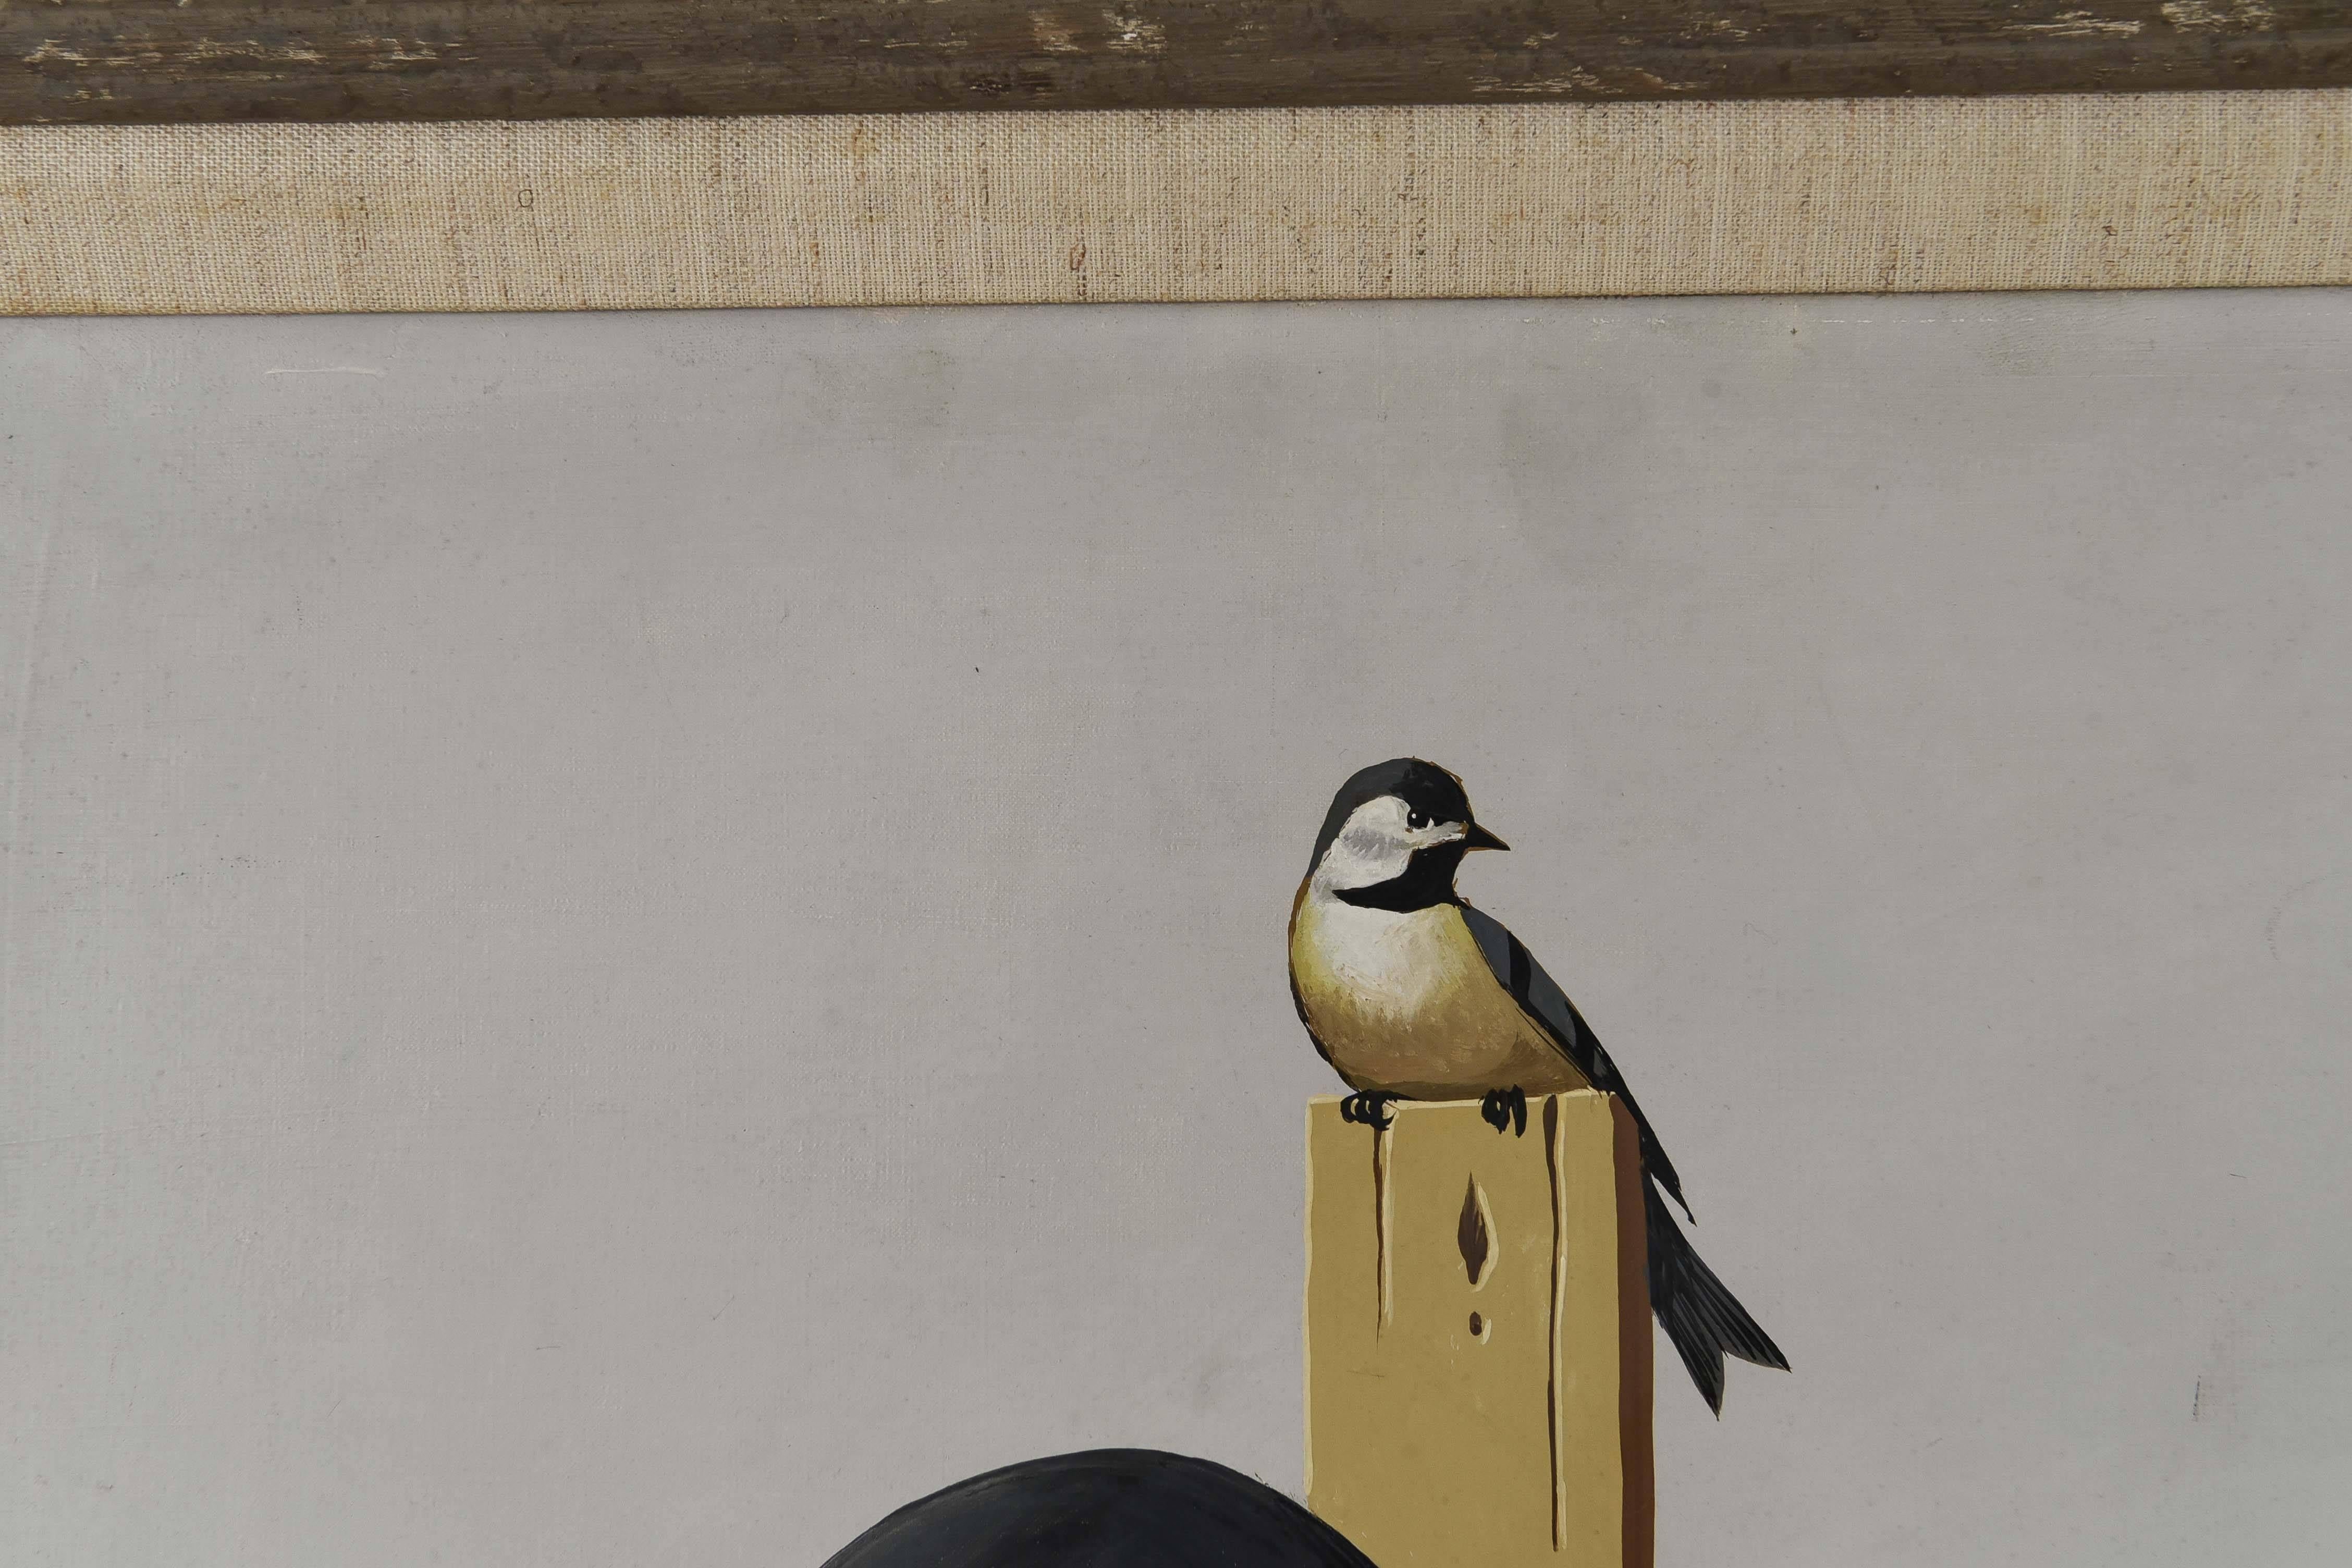 A surrealist painting by listed French artist Jean Pierre Clement depicting a young male figure with a white, frilly neckpiece glancing to the right. Behind him sits a chickadee on a post, and beyond a field of farmland stretches to a distant